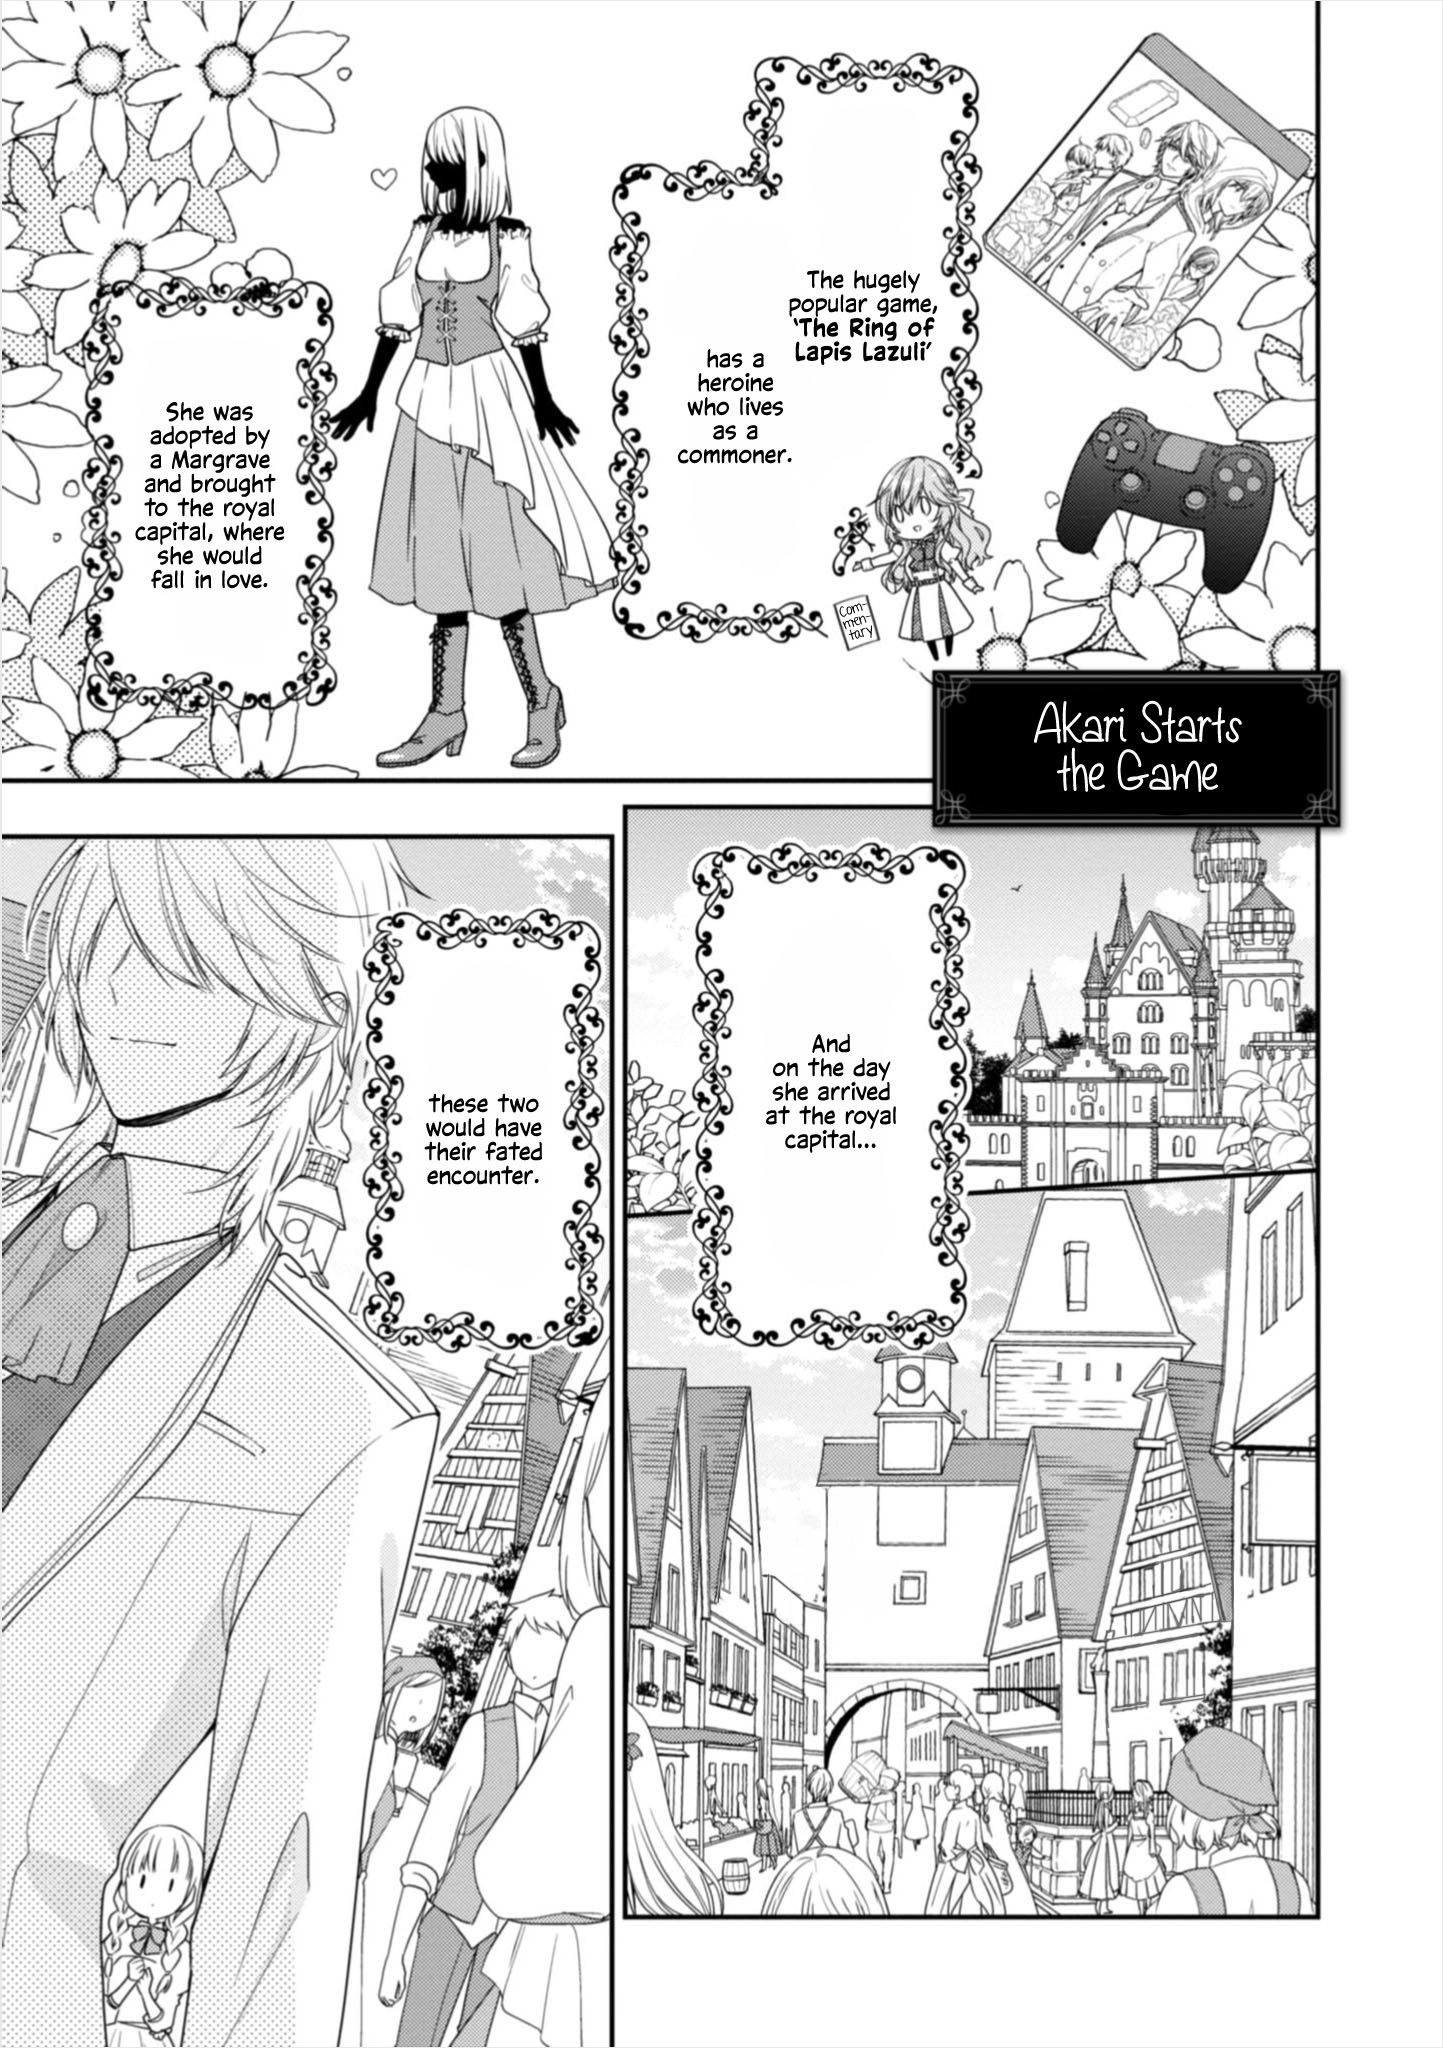 The Villainess Is Adored By The Crown Prince Of The Neighboring Kingdom - Page 2